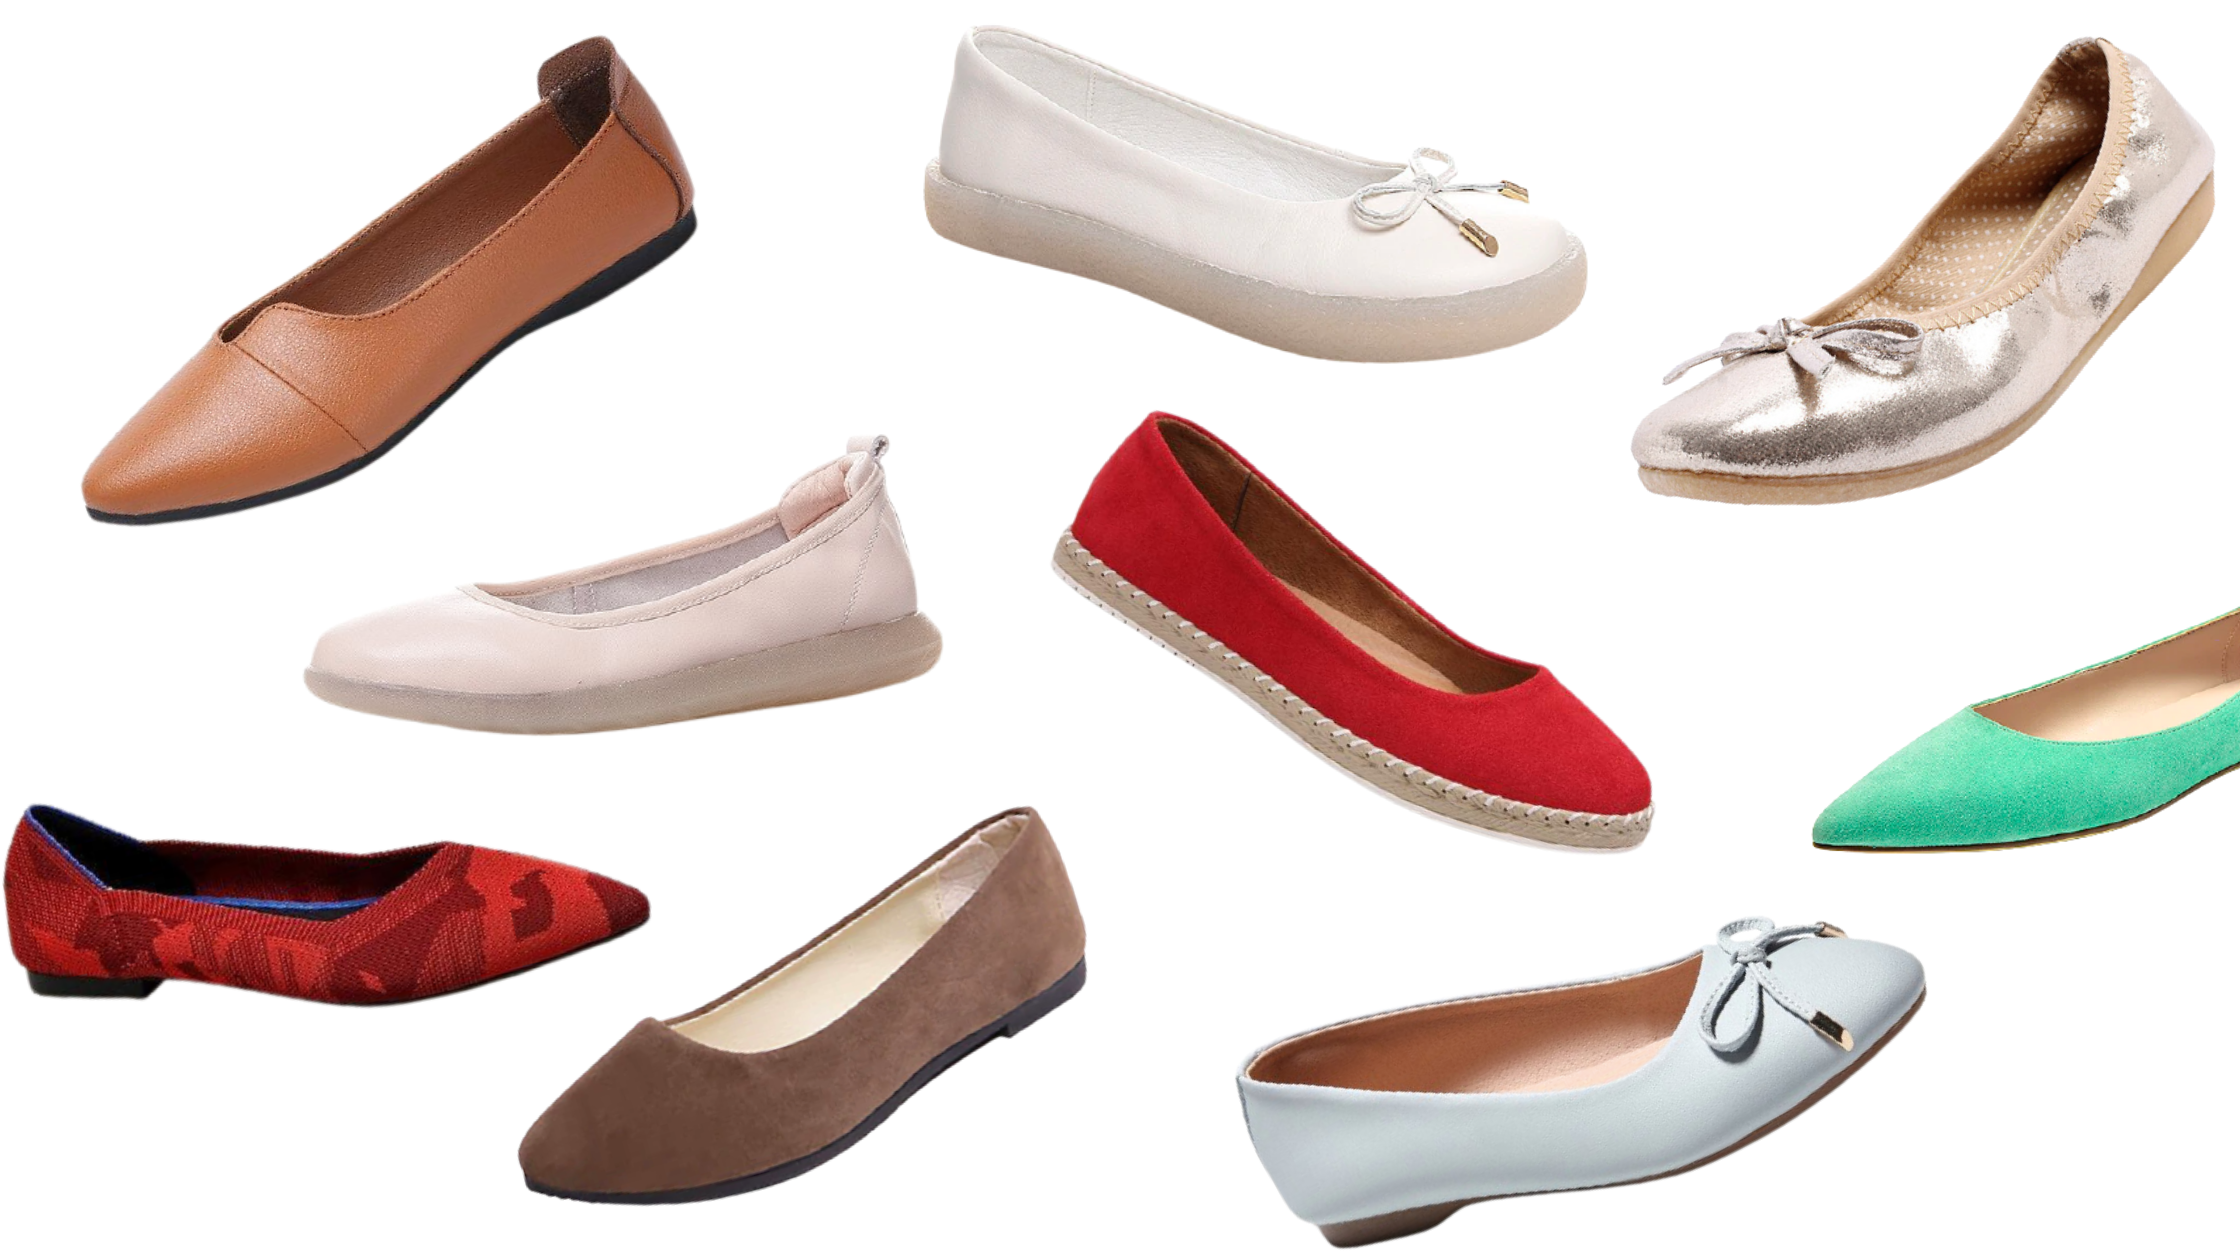 Women's Flats Shoes + FREE SHIPPING | Ultrasellershoes.com – USS® Shoes